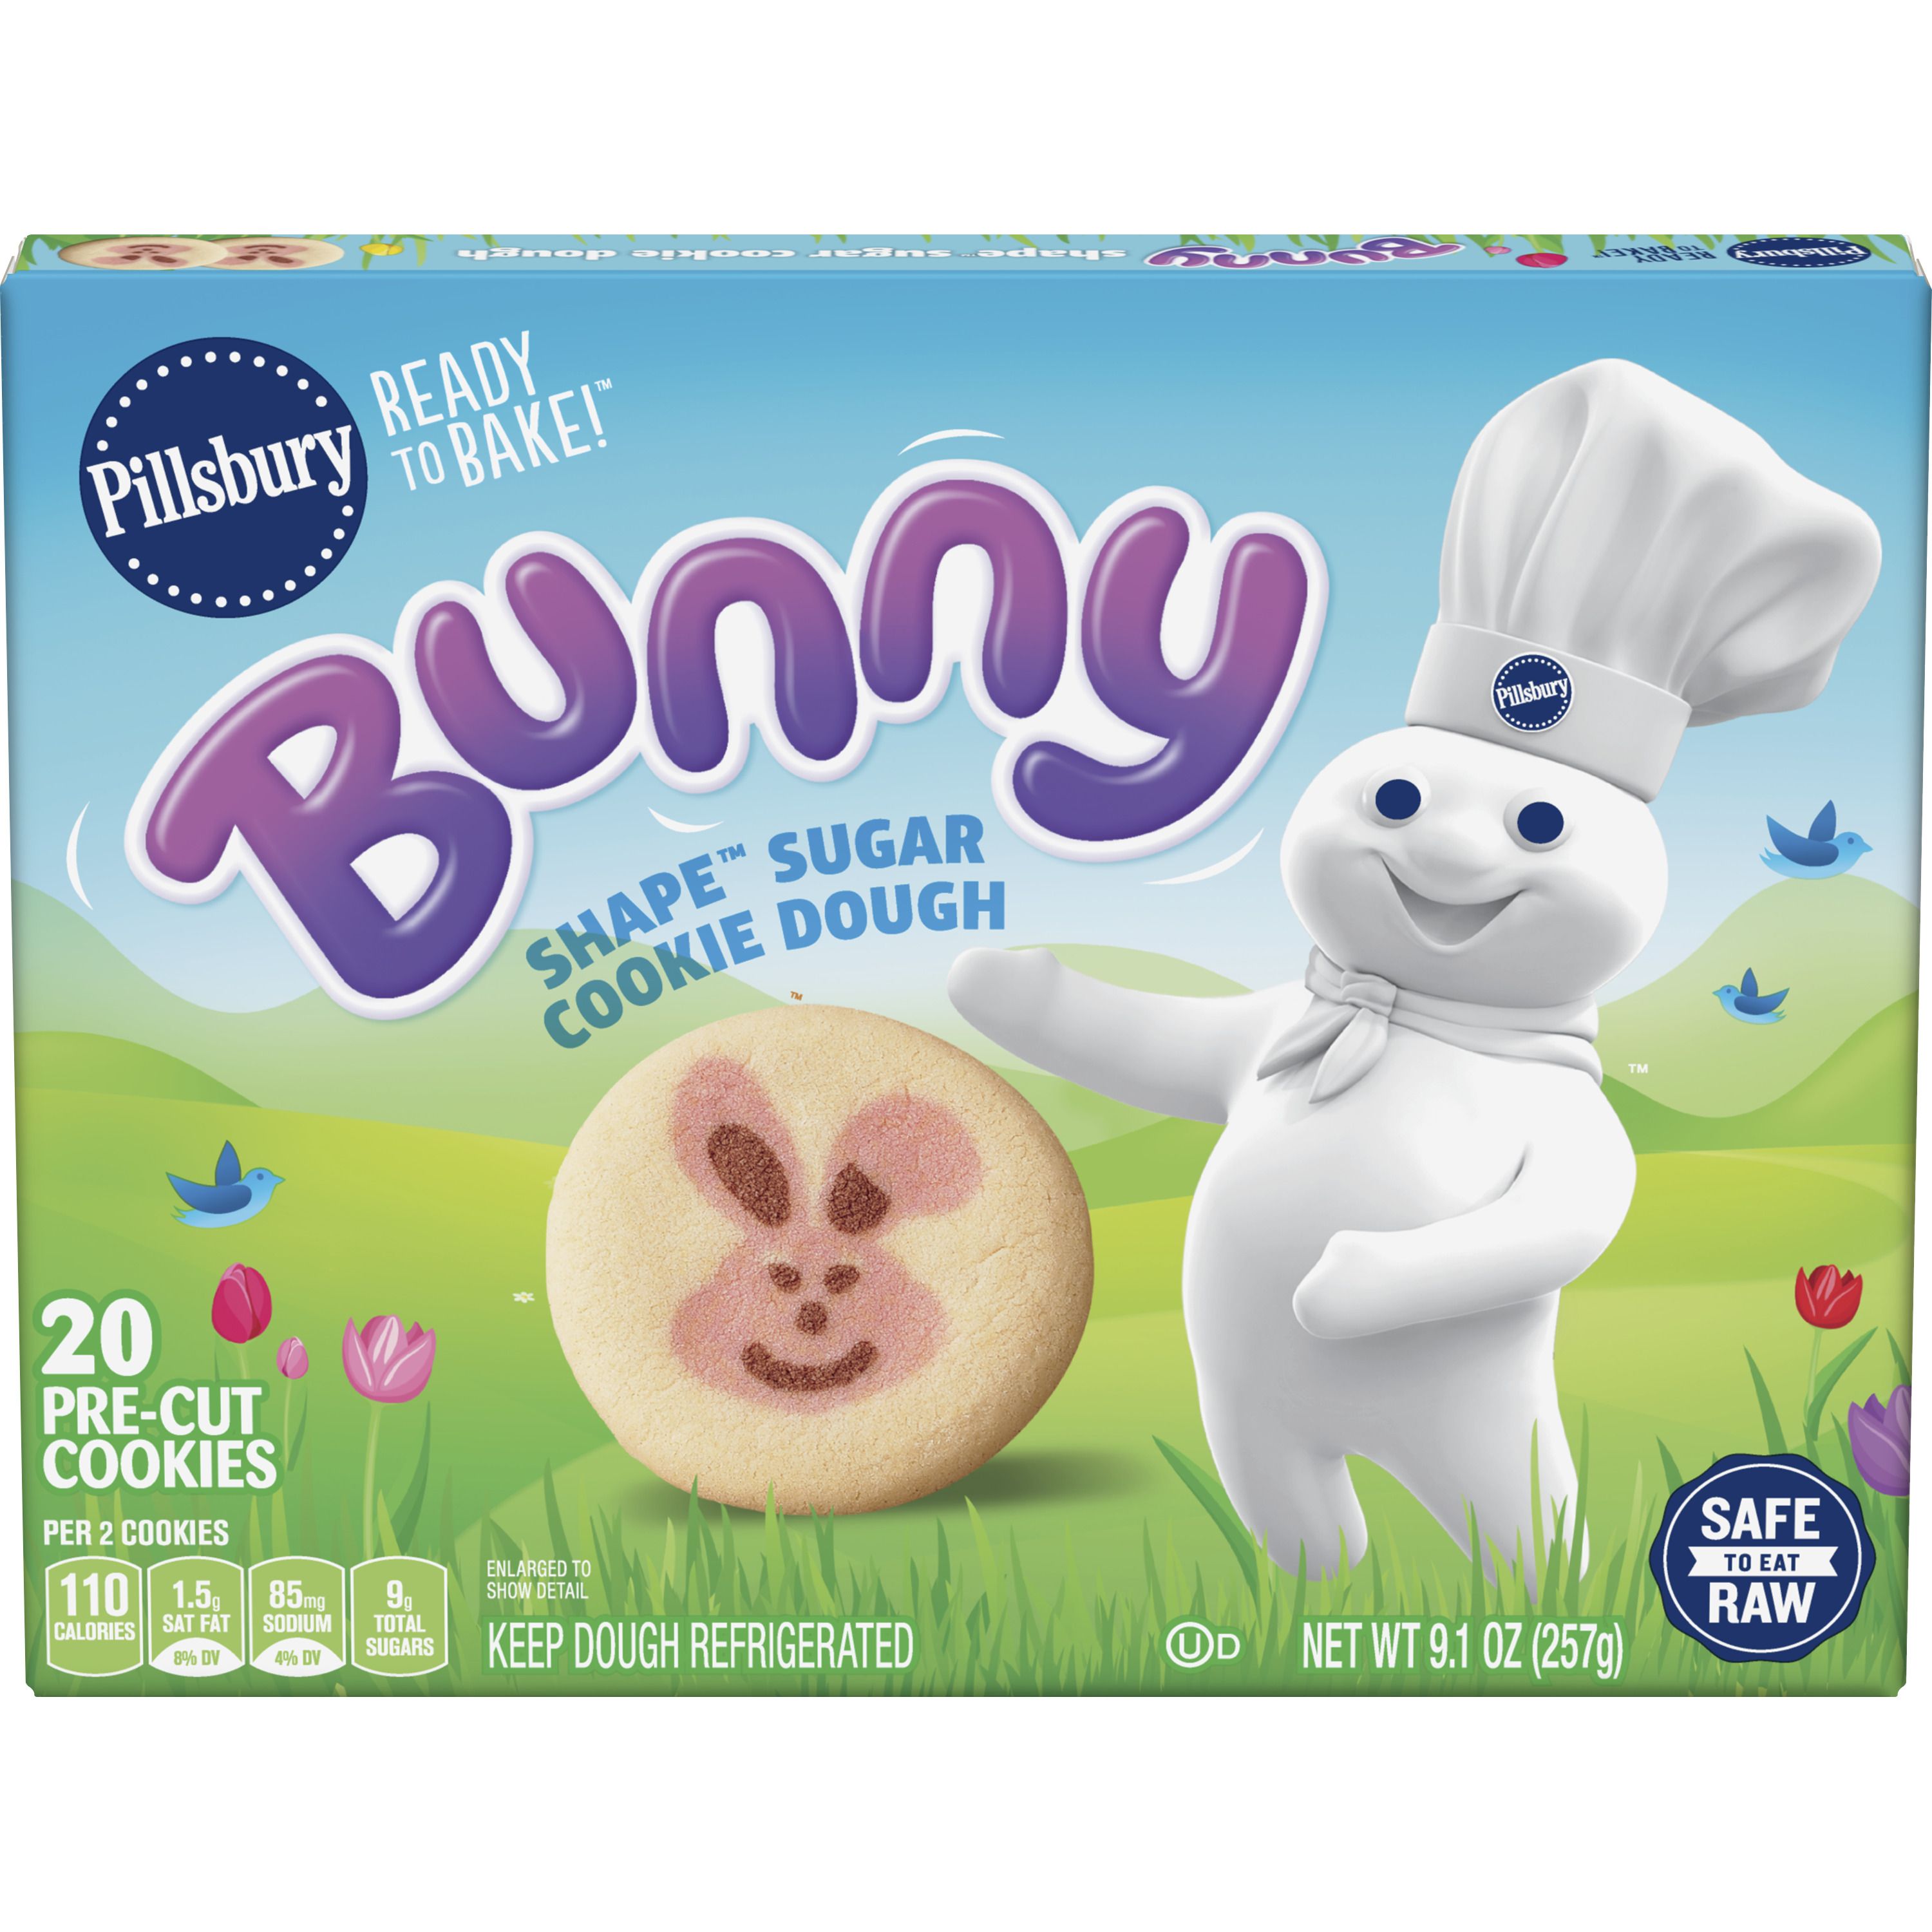 Pillsbury™ Ready to Bake! Bunny Shape Sugar Cookie Dough 20 Count - Front